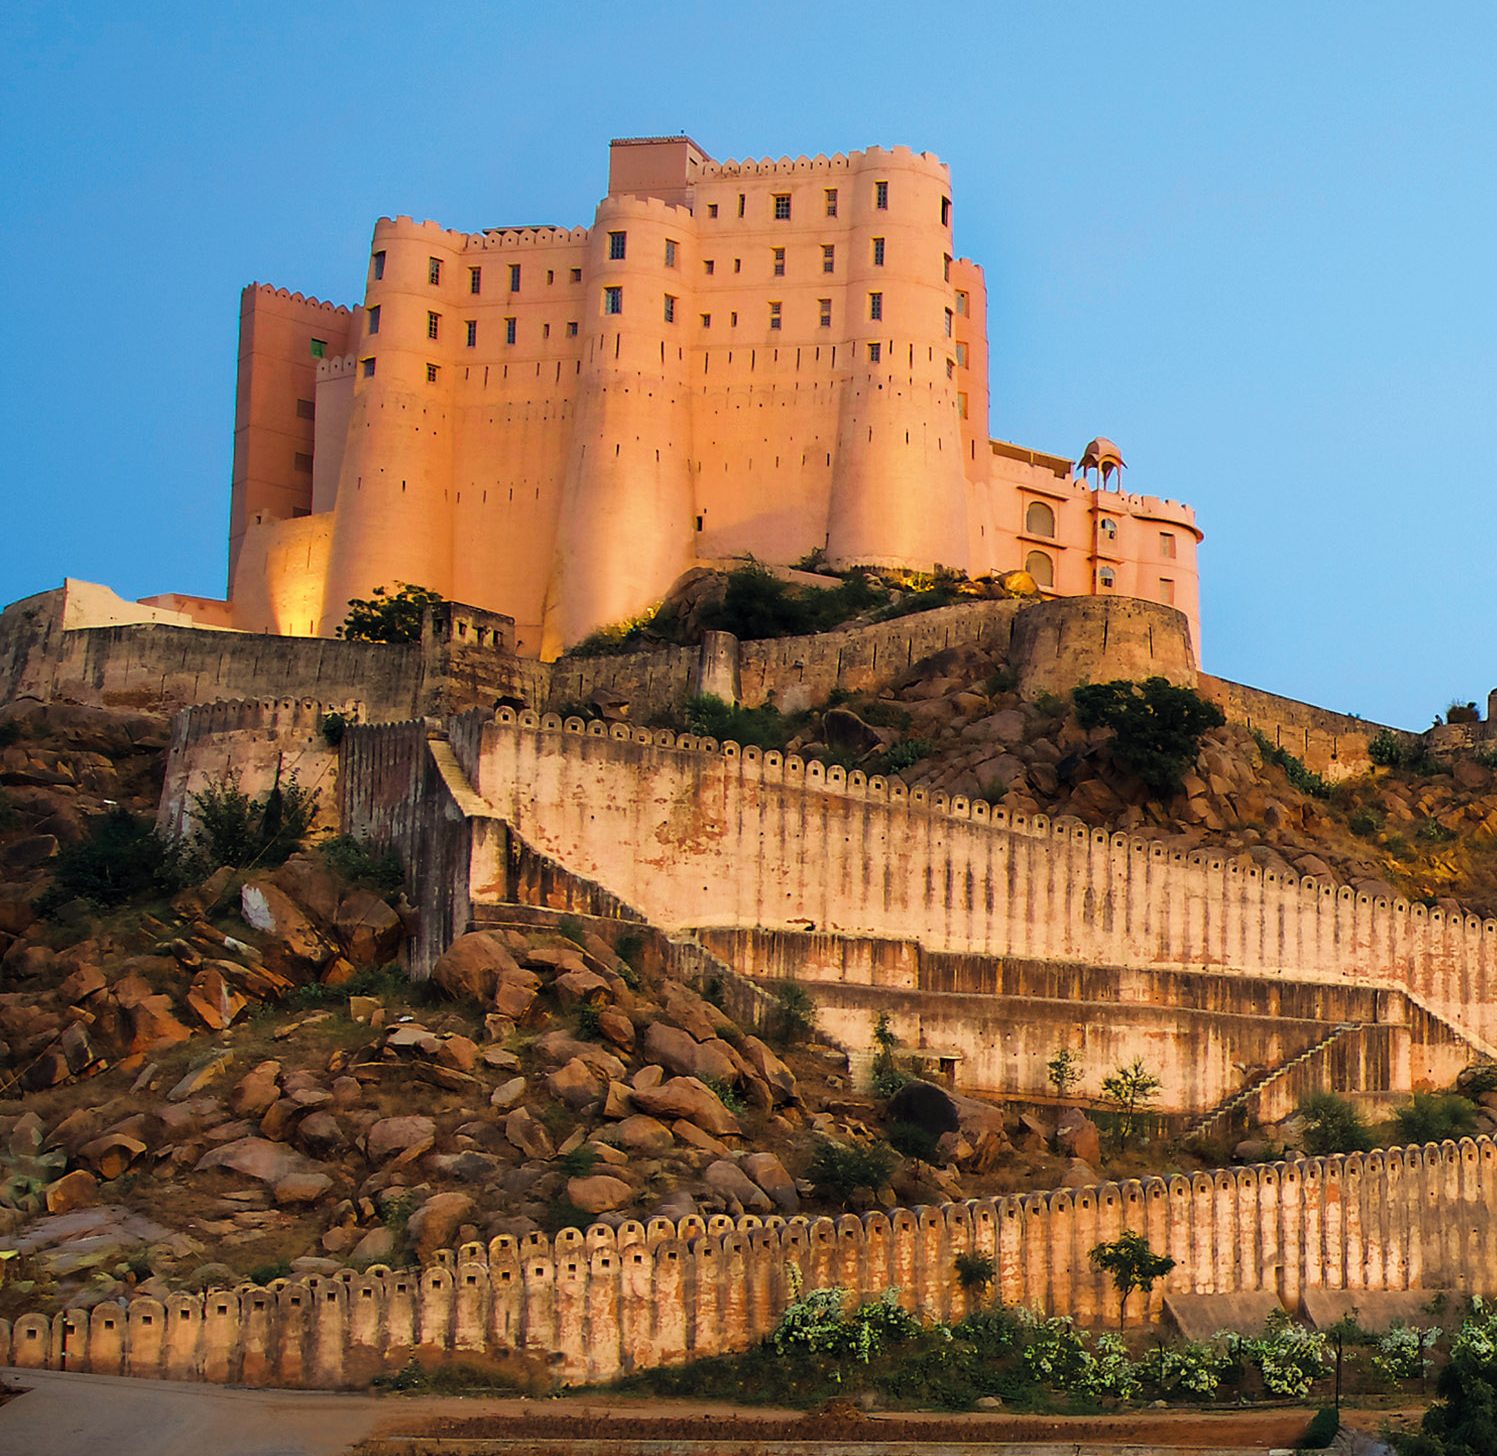 Set on a granite hill, the watchful fortress looks out over the Aravalli Range